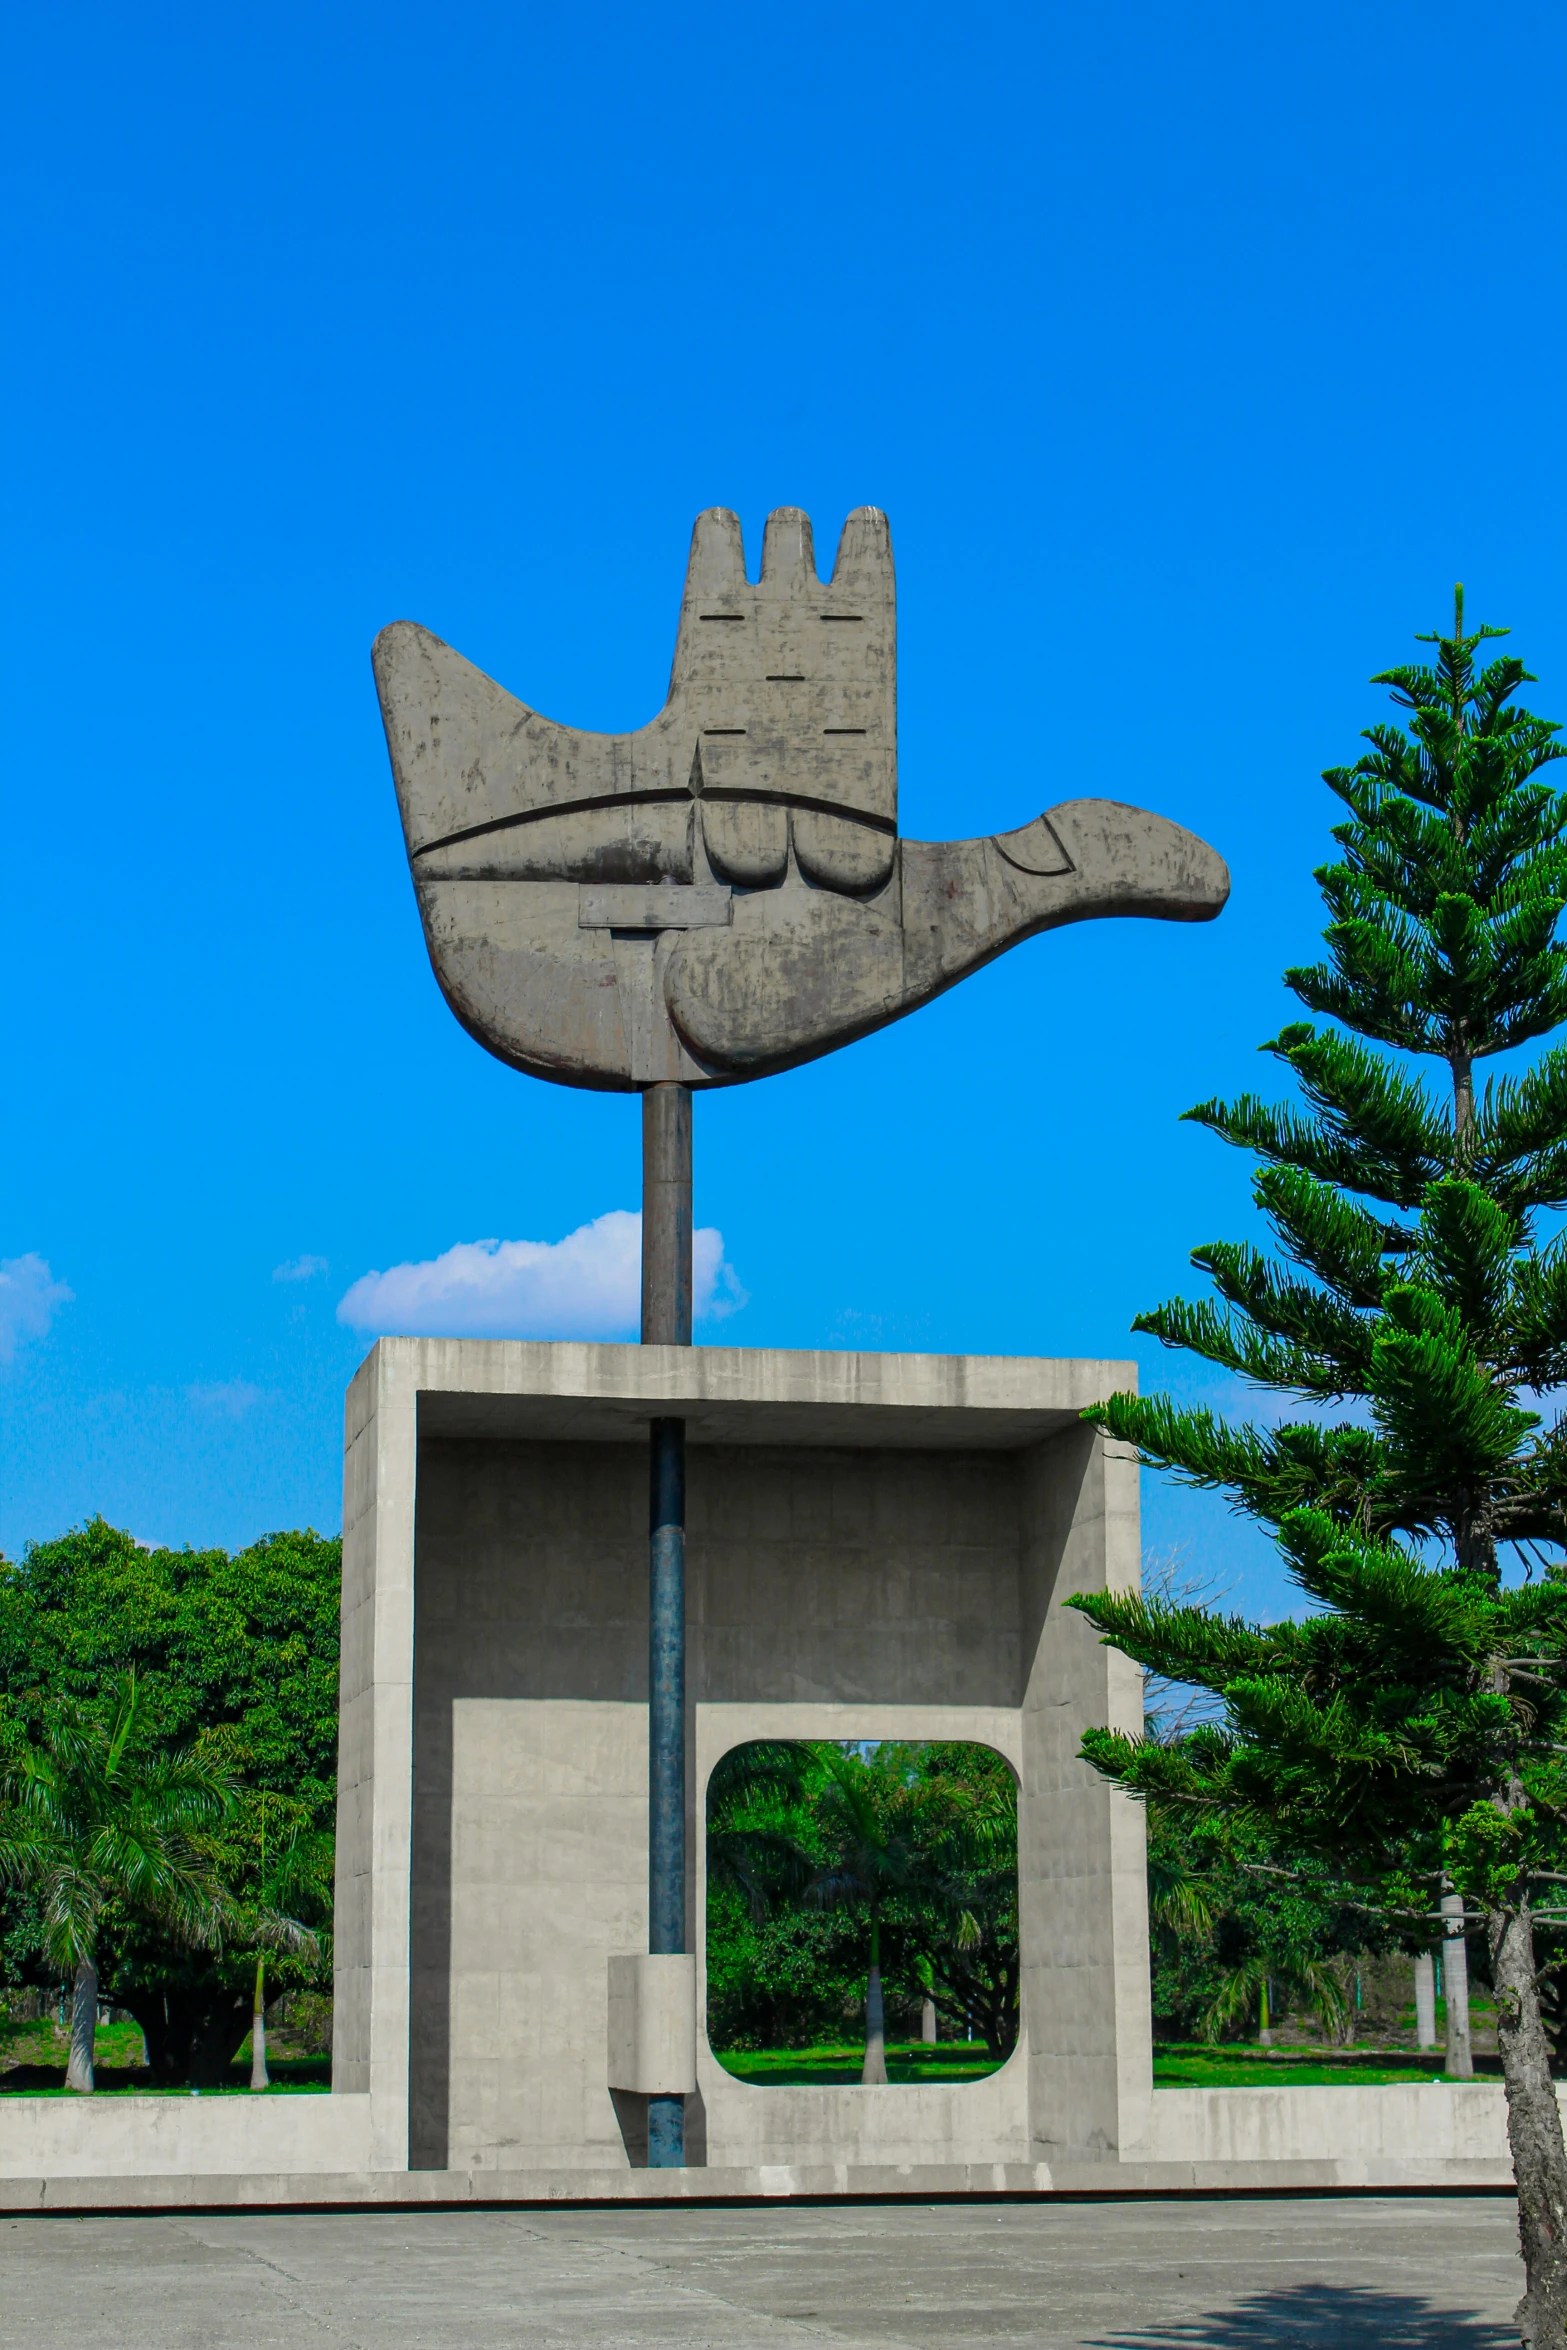 the large, concrete sculpture has an interesting hand and symbol